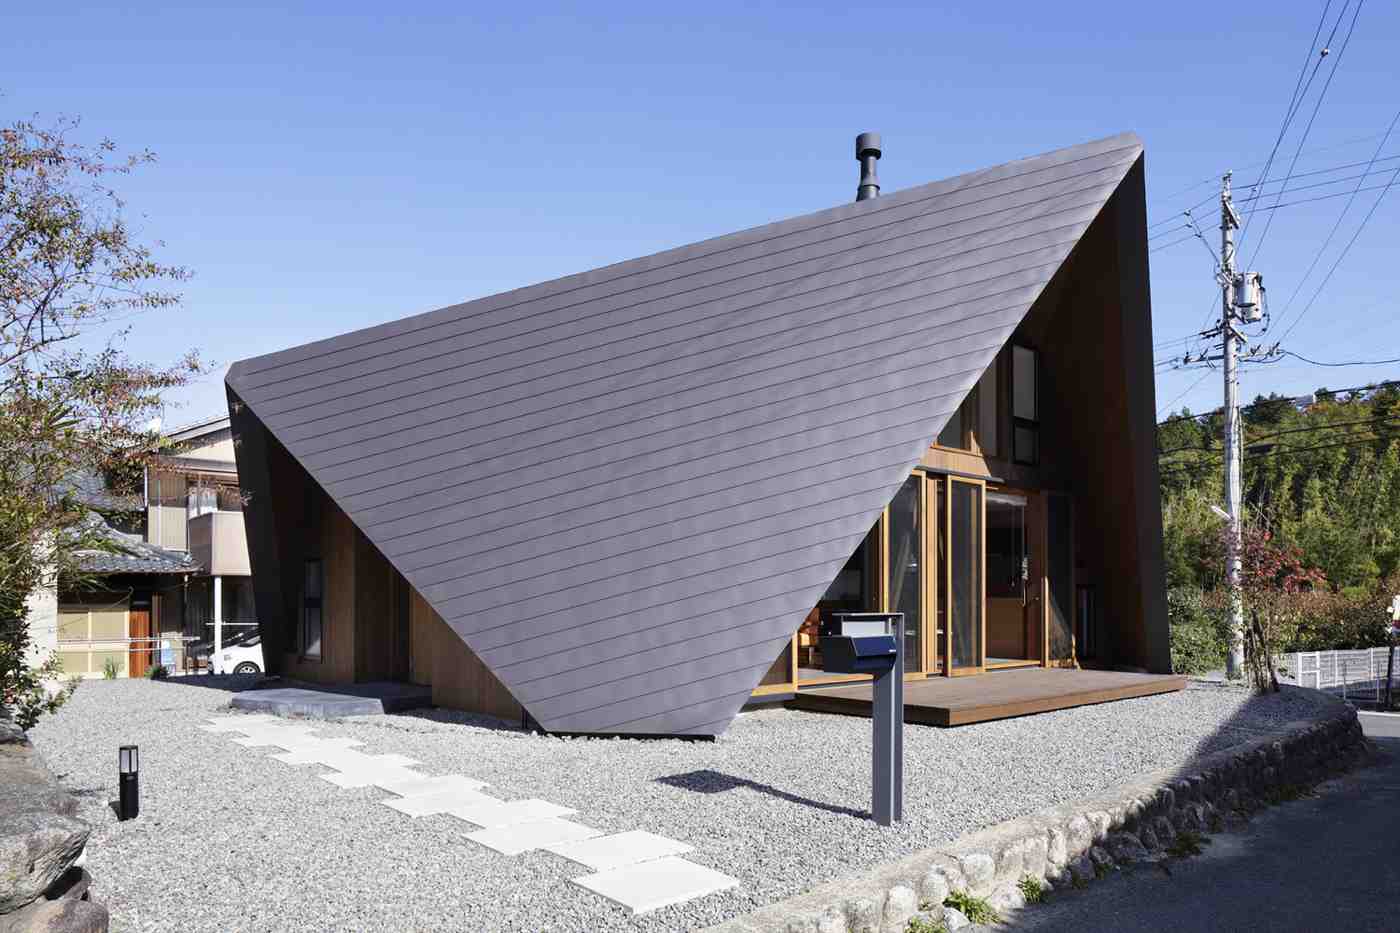 Roof house modern interpreted building concept in Japanese style Examples of architect houses on two stonework with glass facade